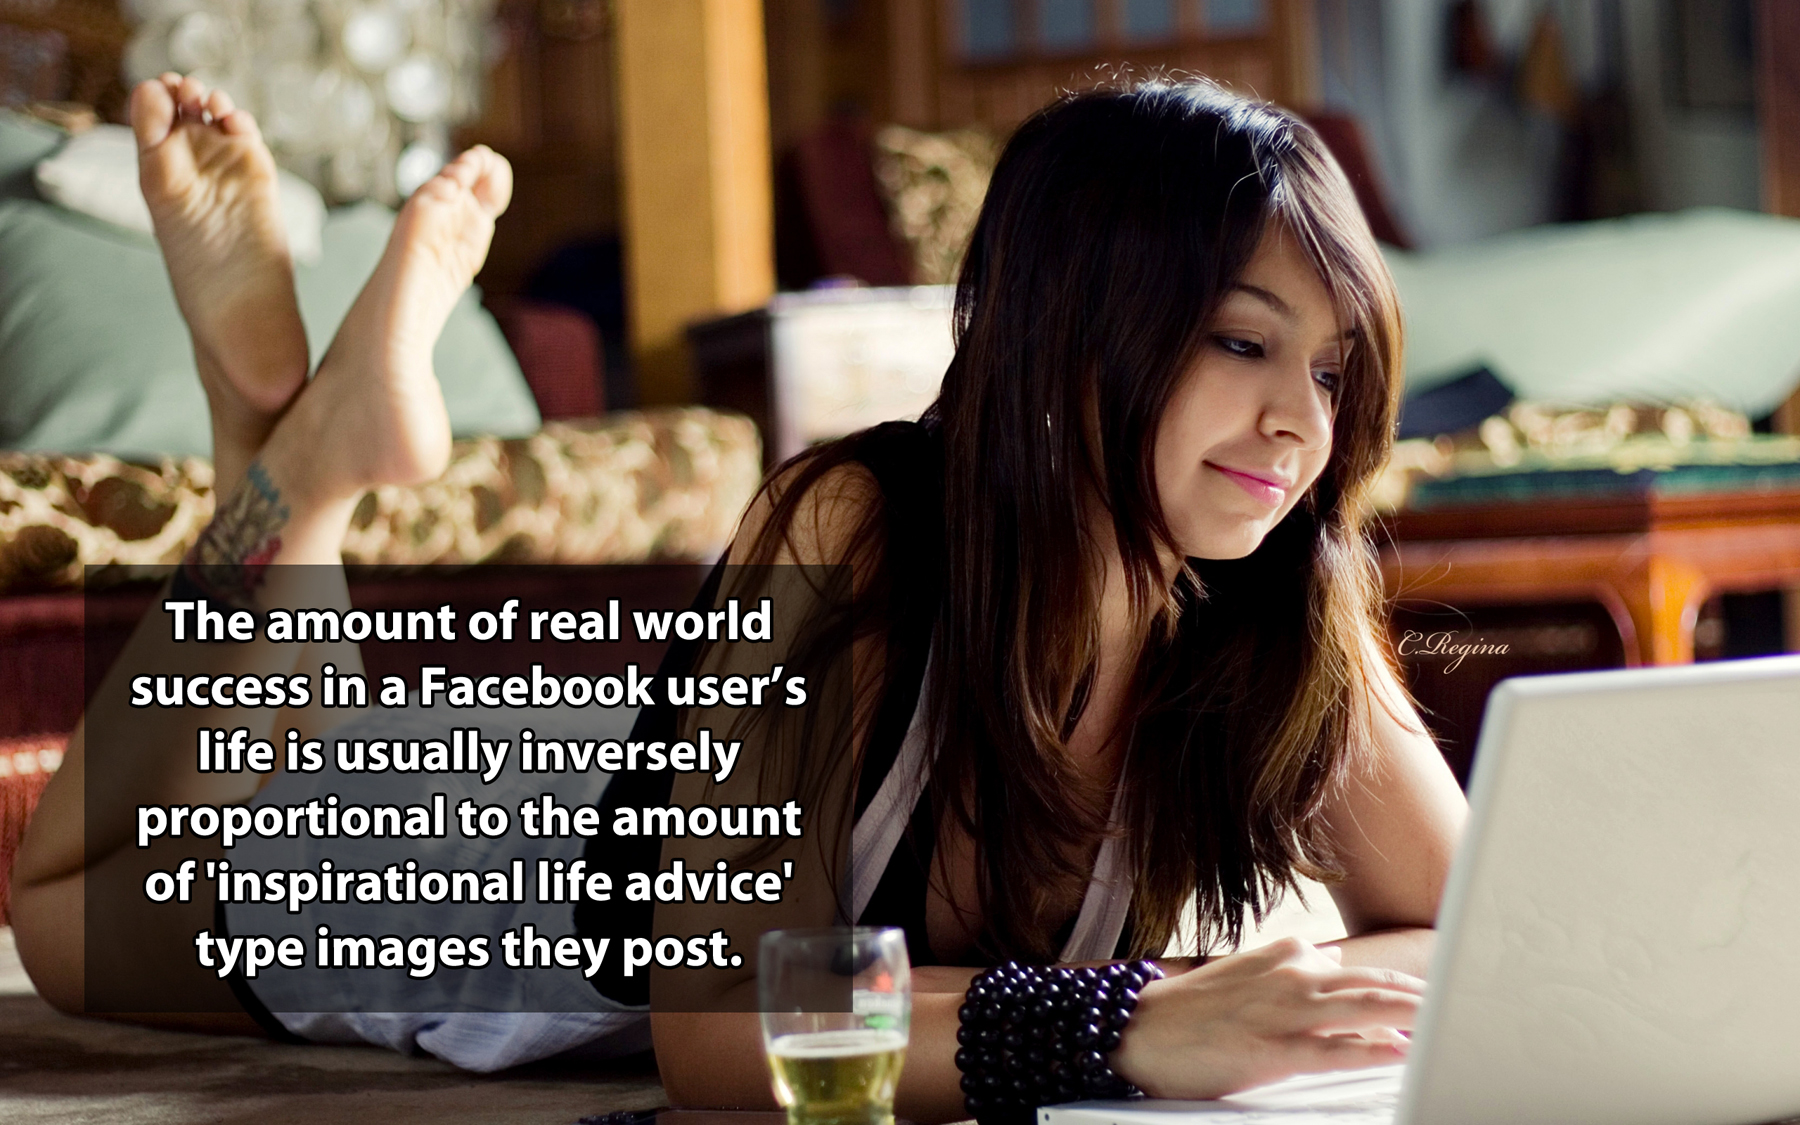 girl on the computer - The amount of real world success in a Facebook user's life is usually inversely proportional to the amount of 'inspirational life advice' type images they post.